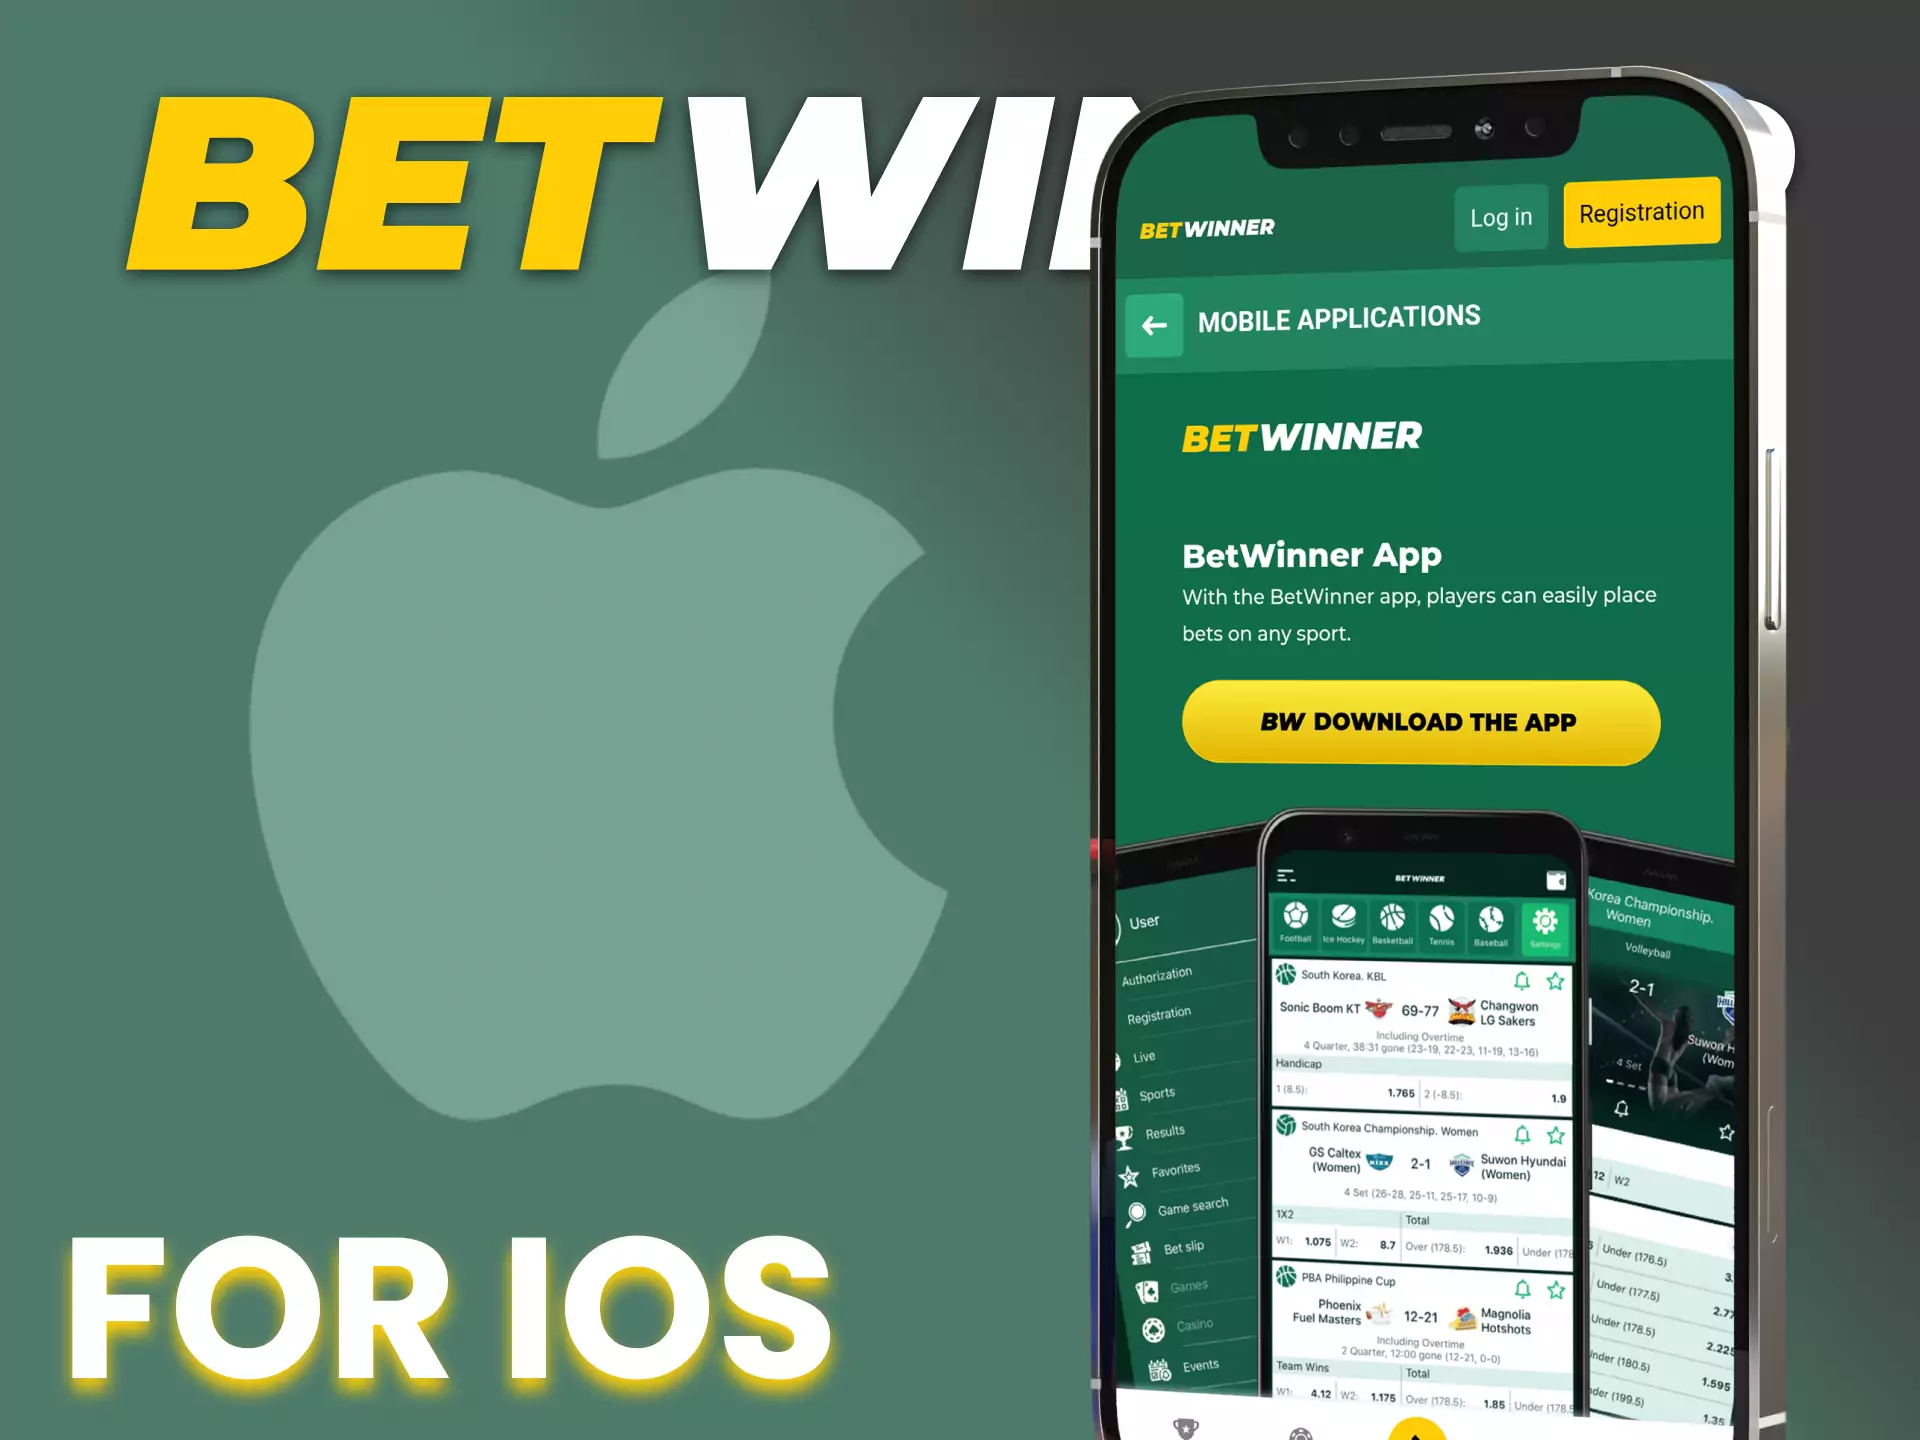 How to start With betwinner iphone in 2021